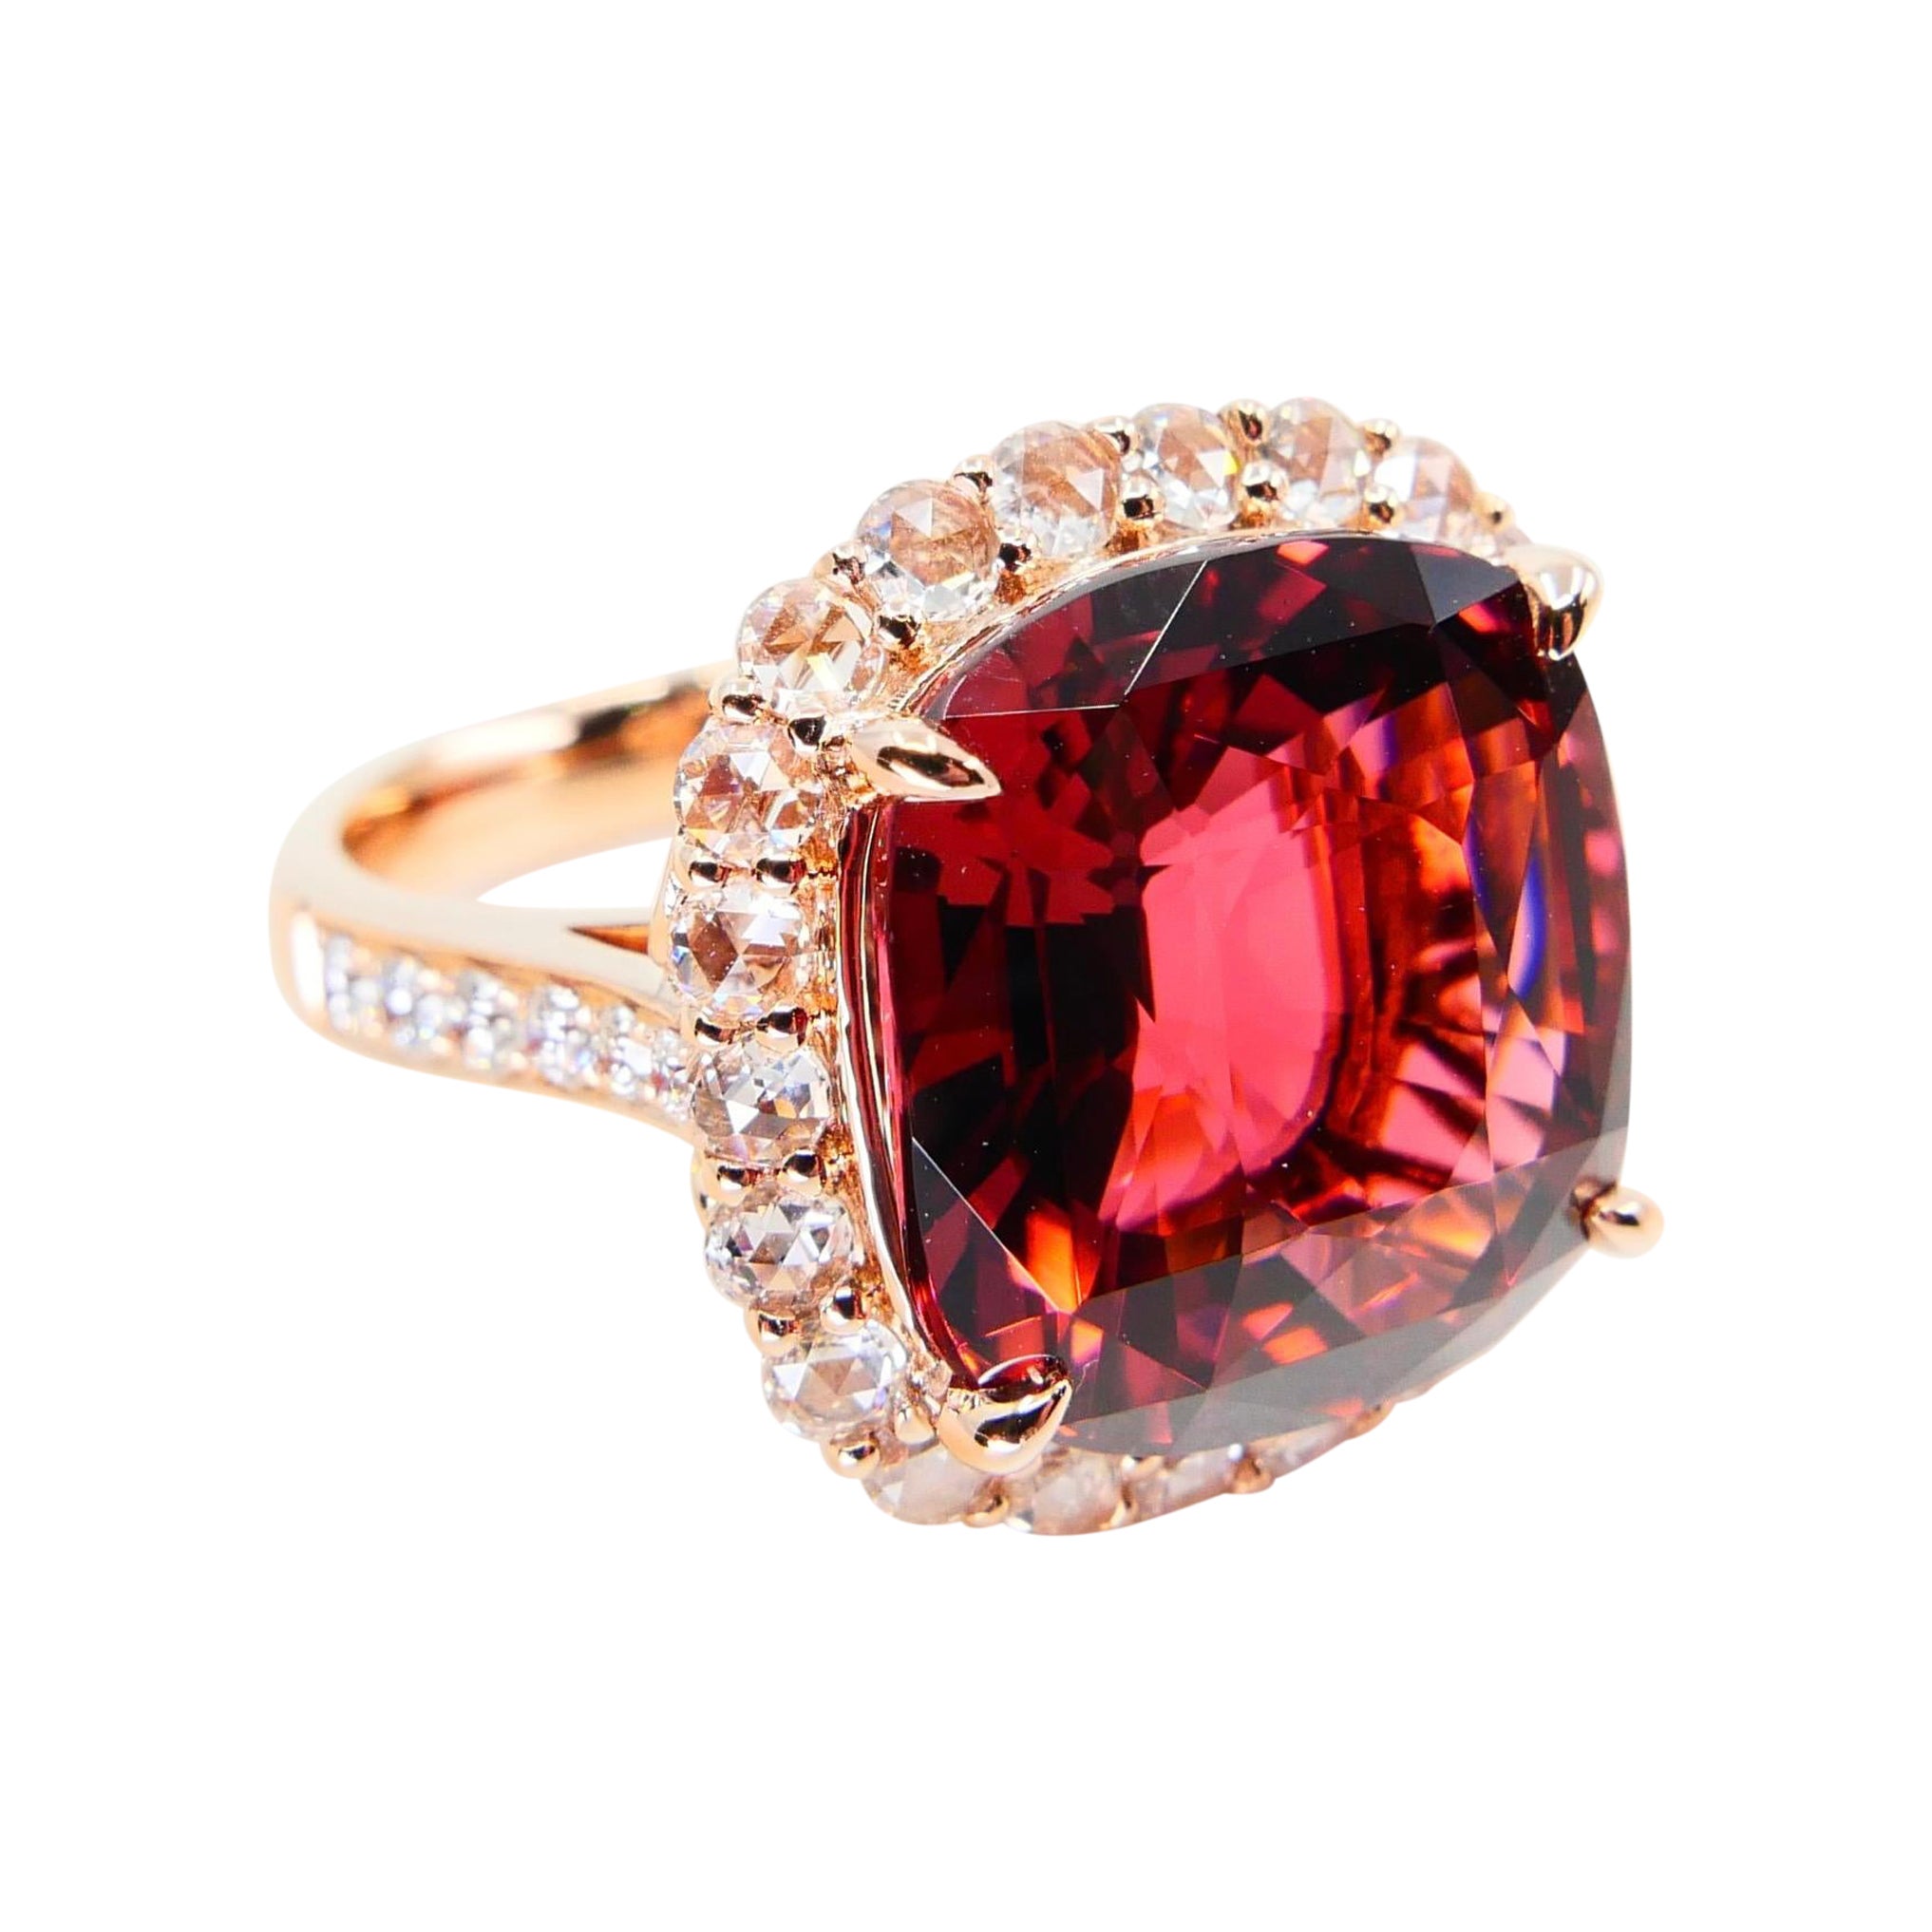 GIA Certified 11.55 Cts Orange Pink Tourmaline & Rose Cut Diamond Cocktail Ring For Sale 9